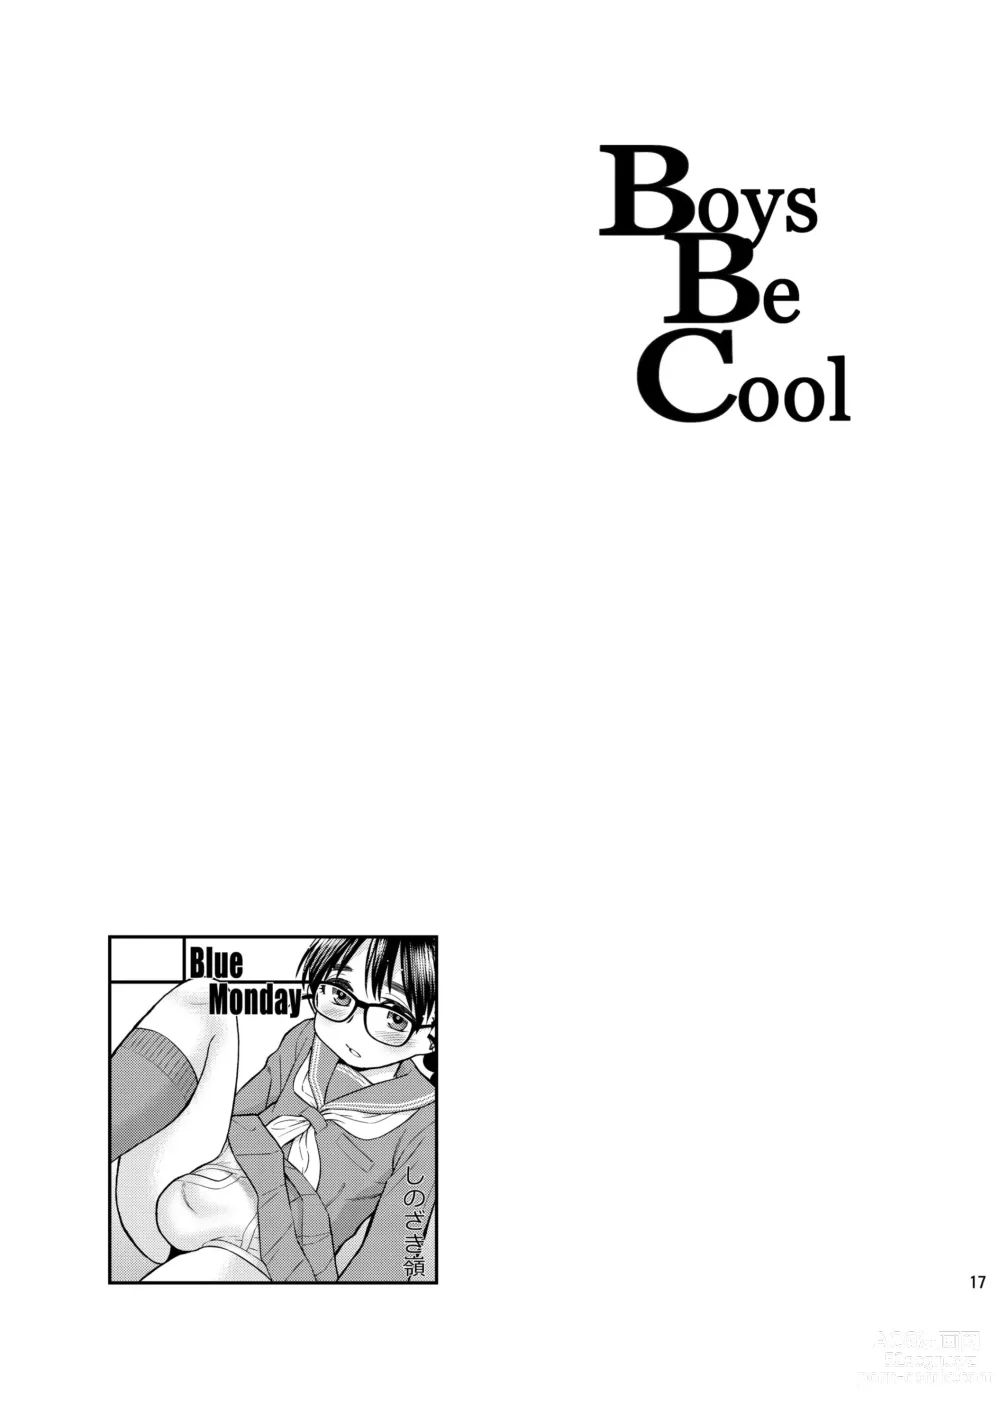 Page 16 of doujinshi Boys Be Cool